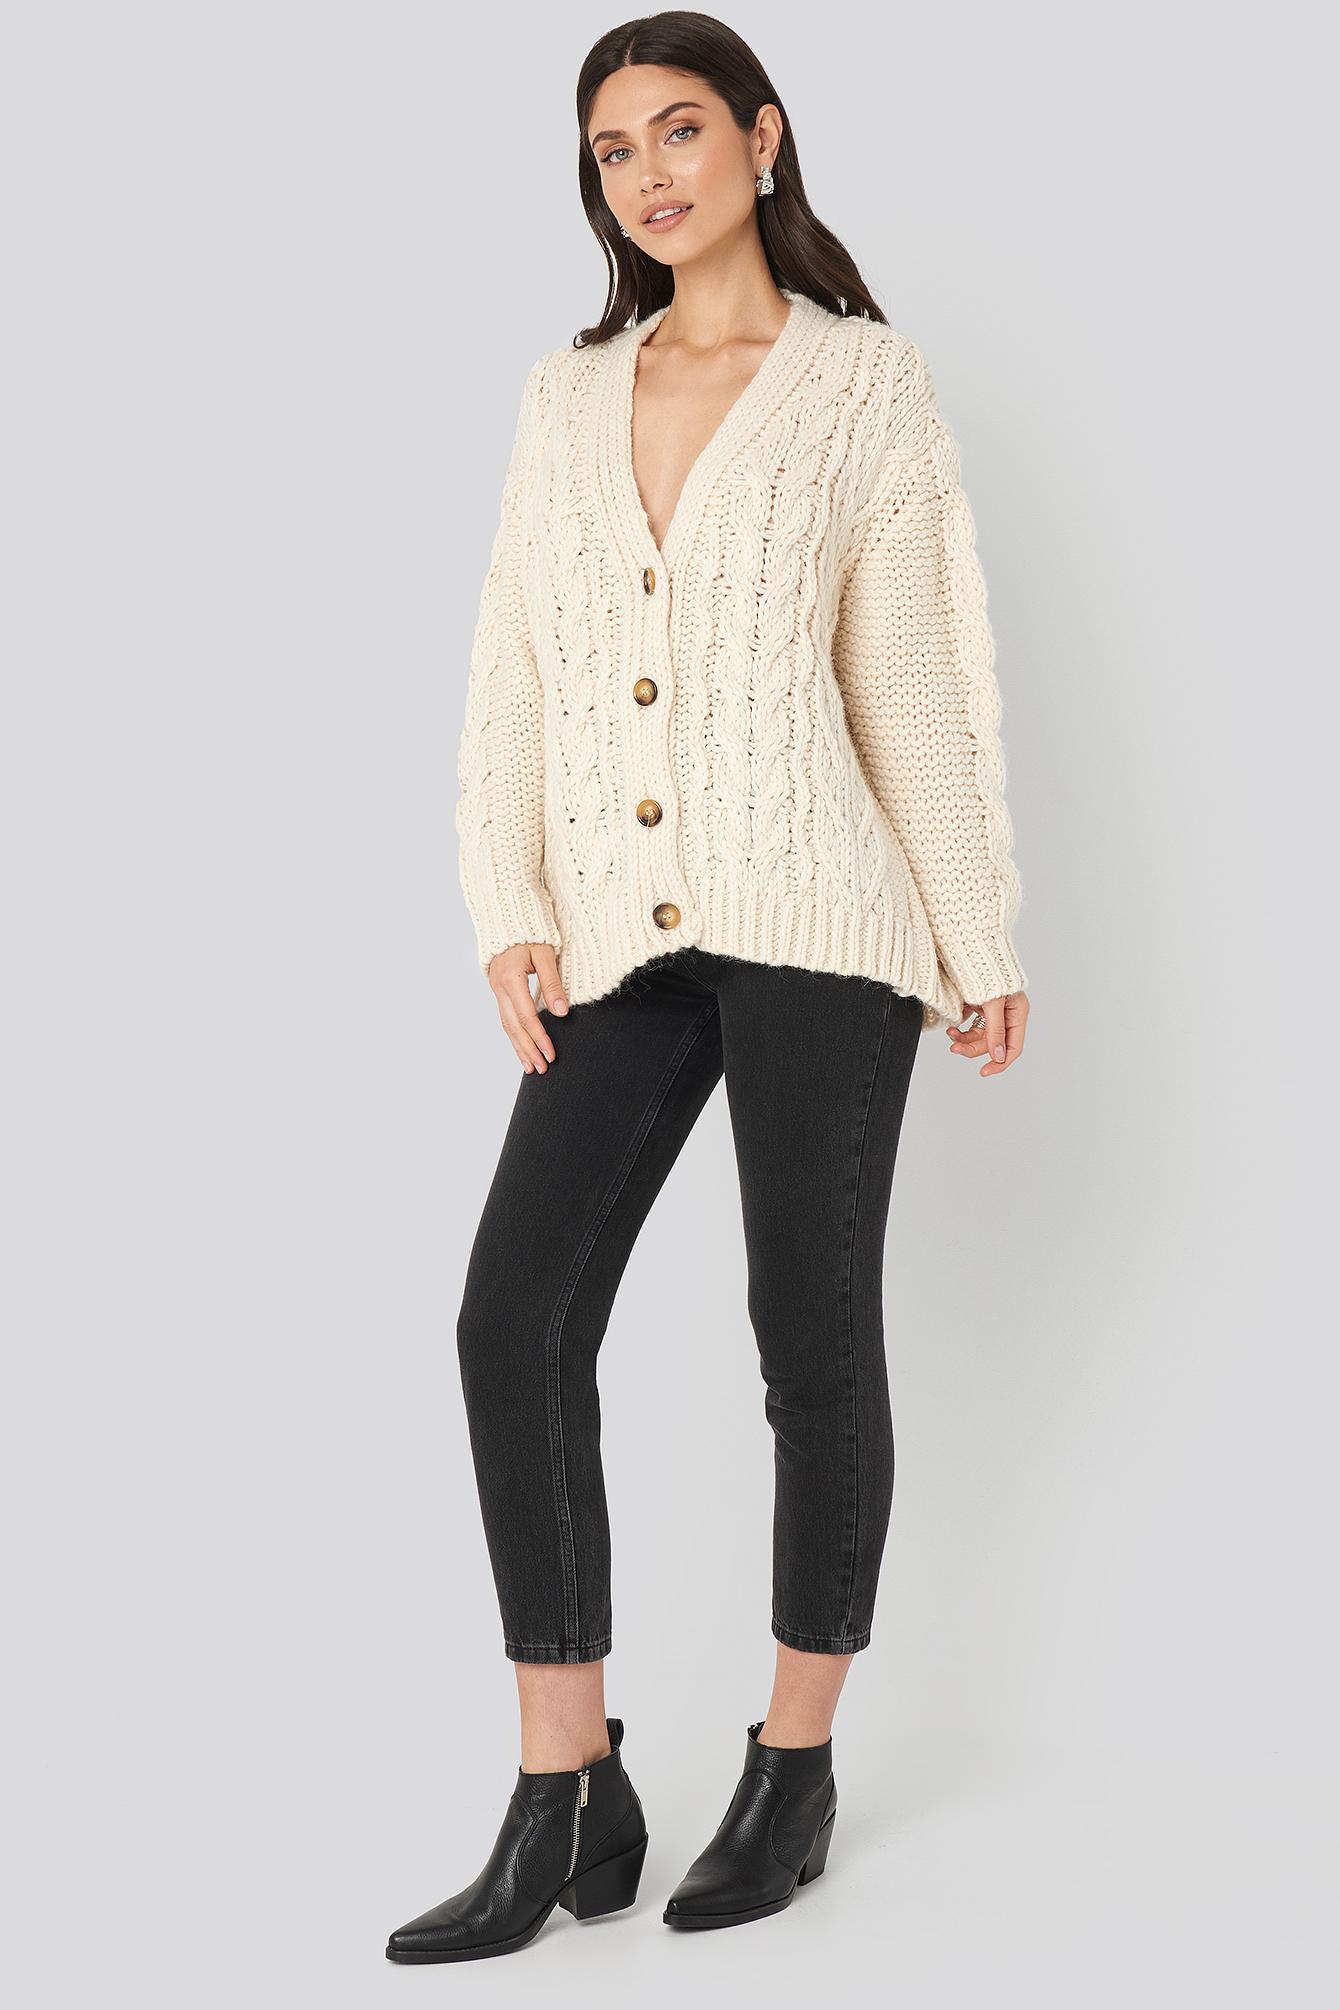 Mango Synthetic Yaya Cardigan White in Light Beige (Natural) - Lyst